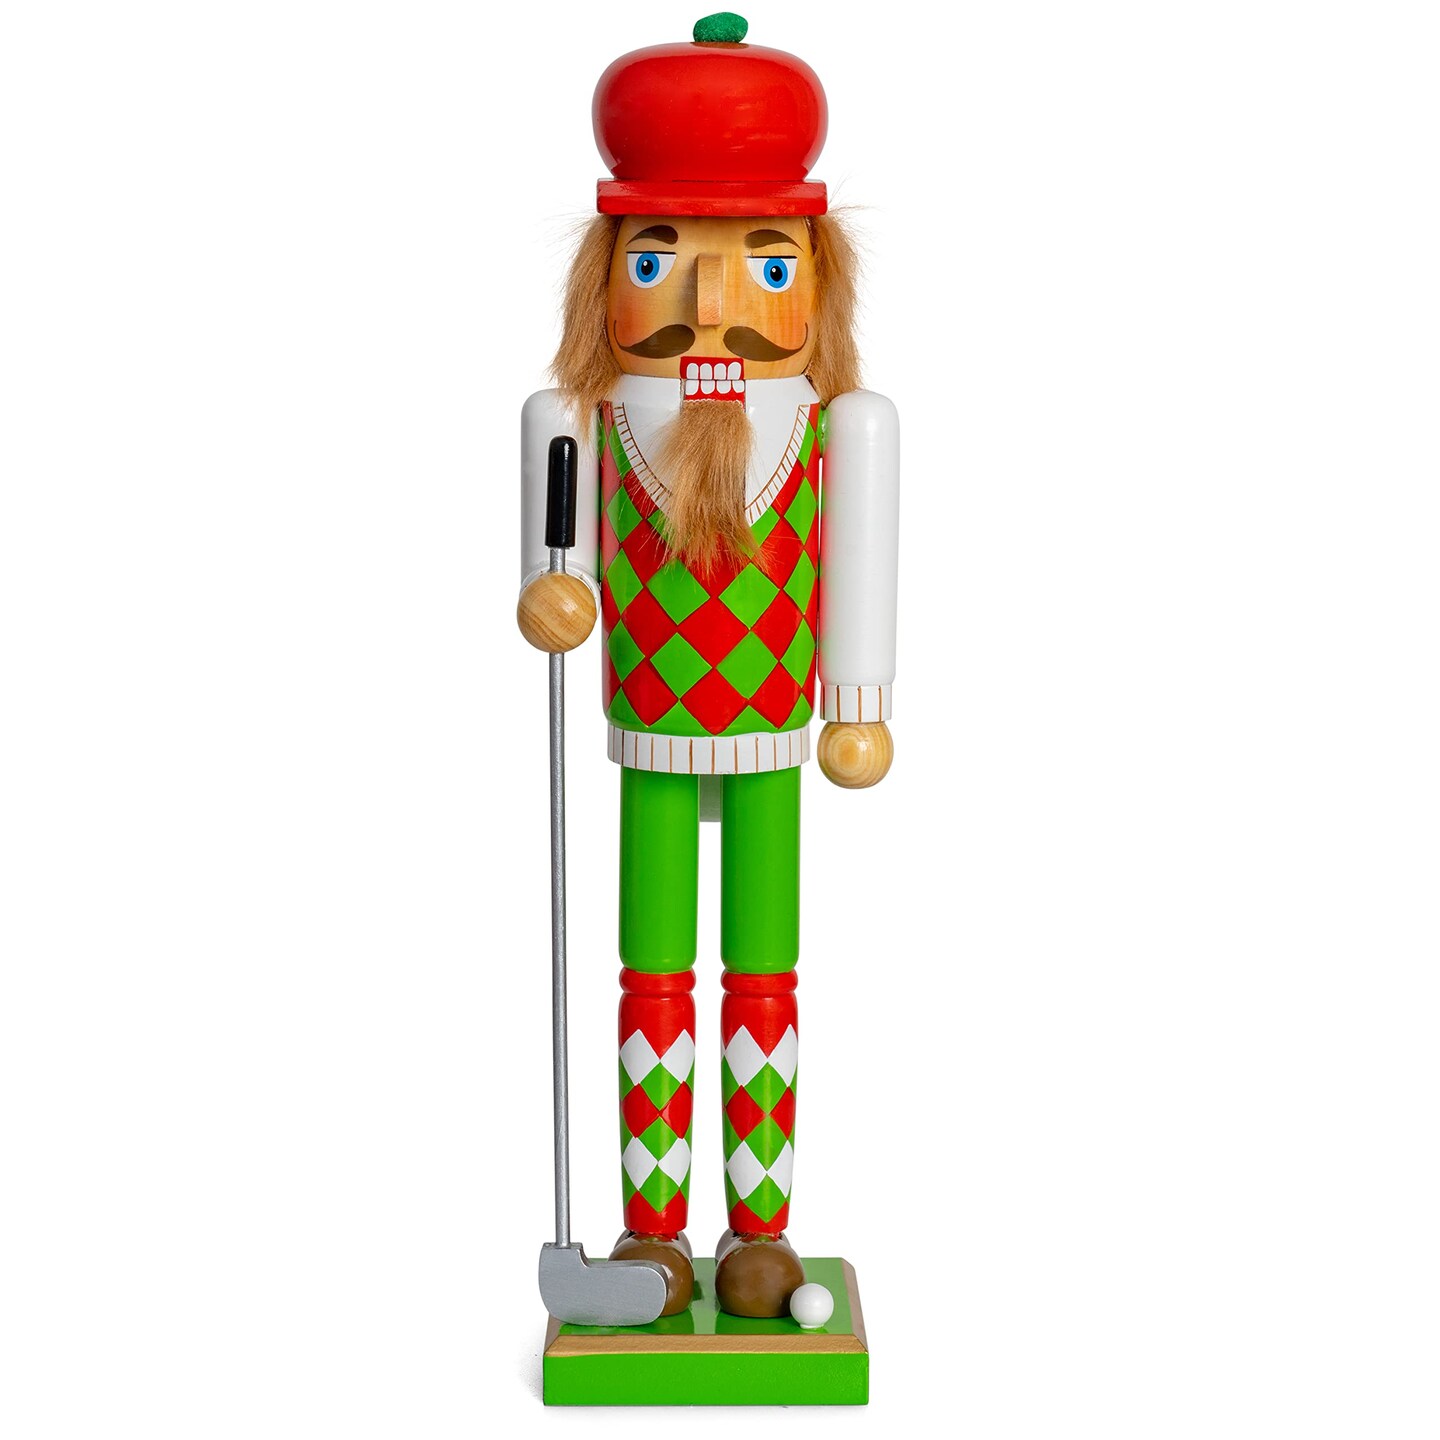 Ornativity Golf Player Christmas Nutcracker &#x2013; Red and Green Wooden Golfer with Club and Ball Xmas Themed Holiday Nut Cracker Doll Figure Toy Decorations